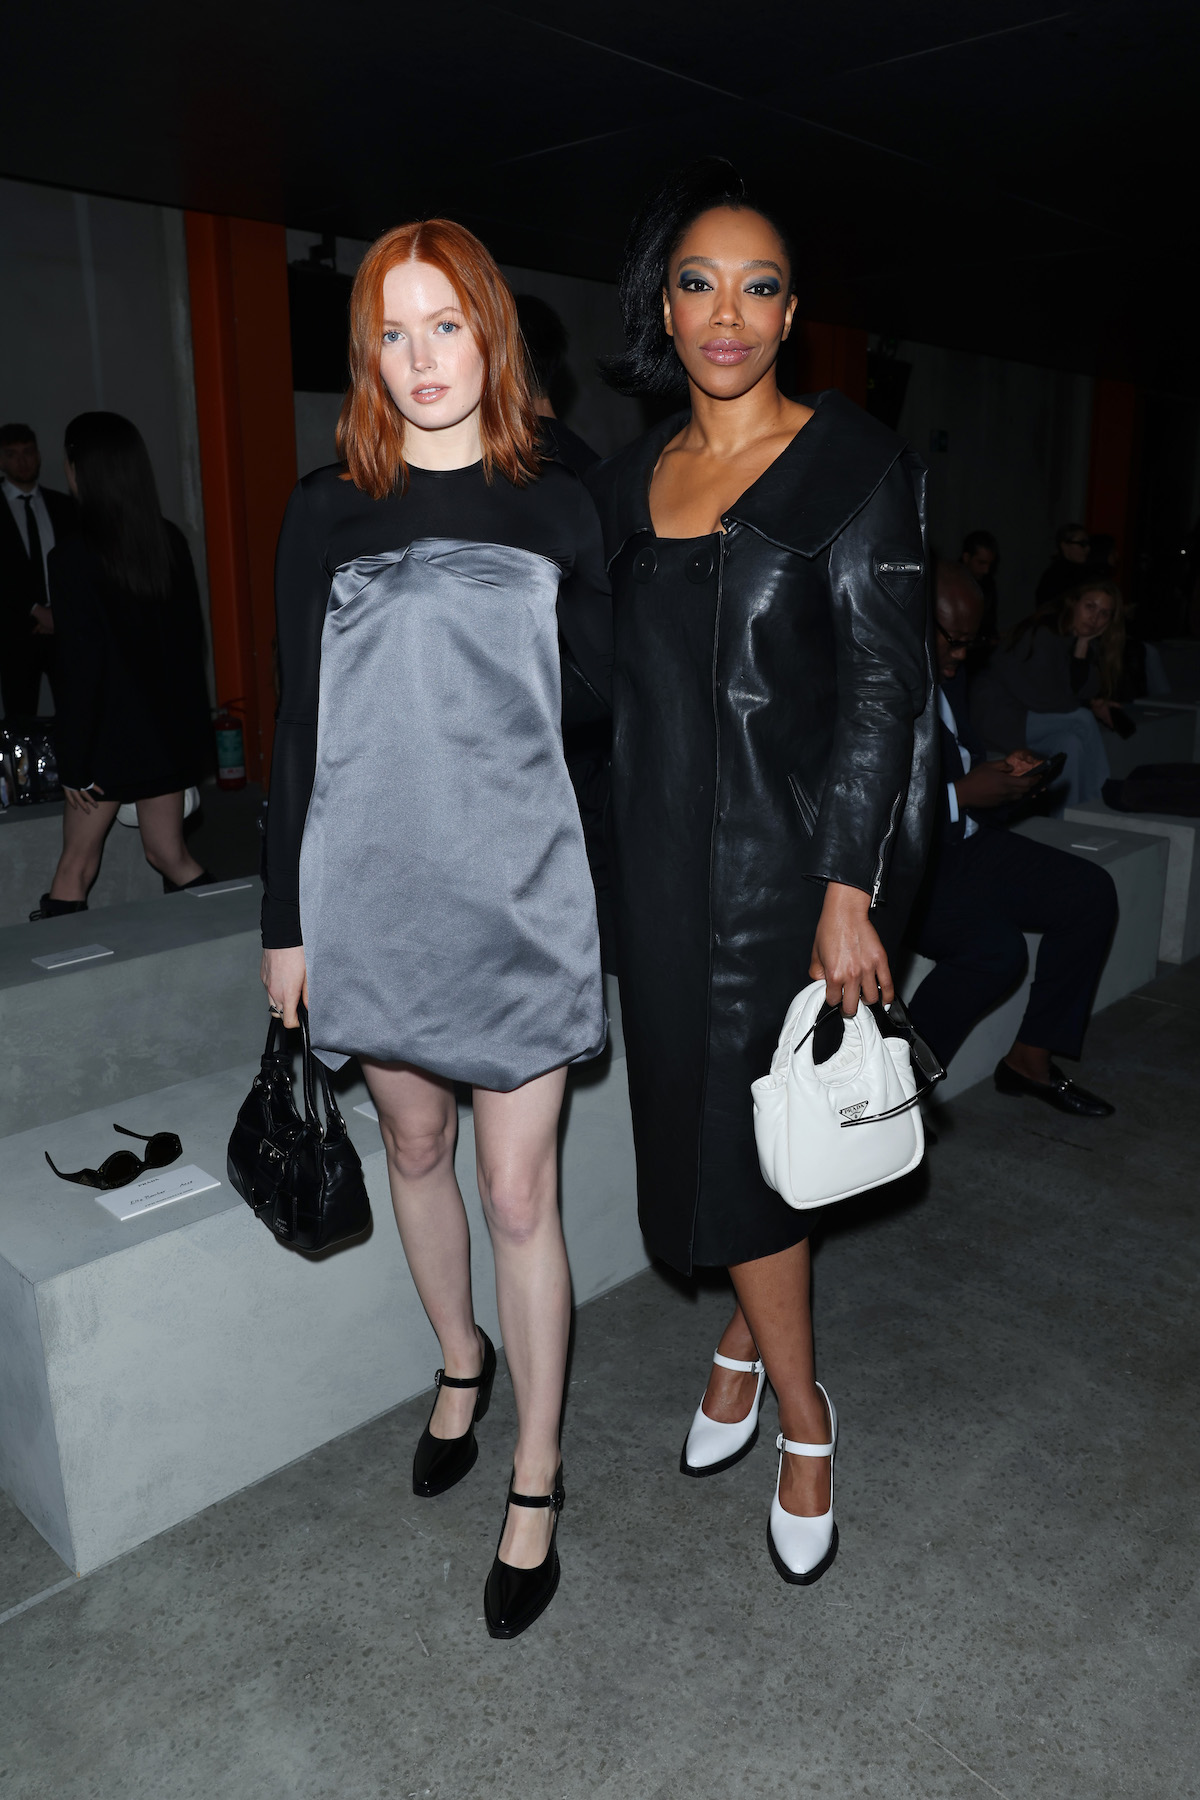 Ellie Bamber and Naomi Ackie